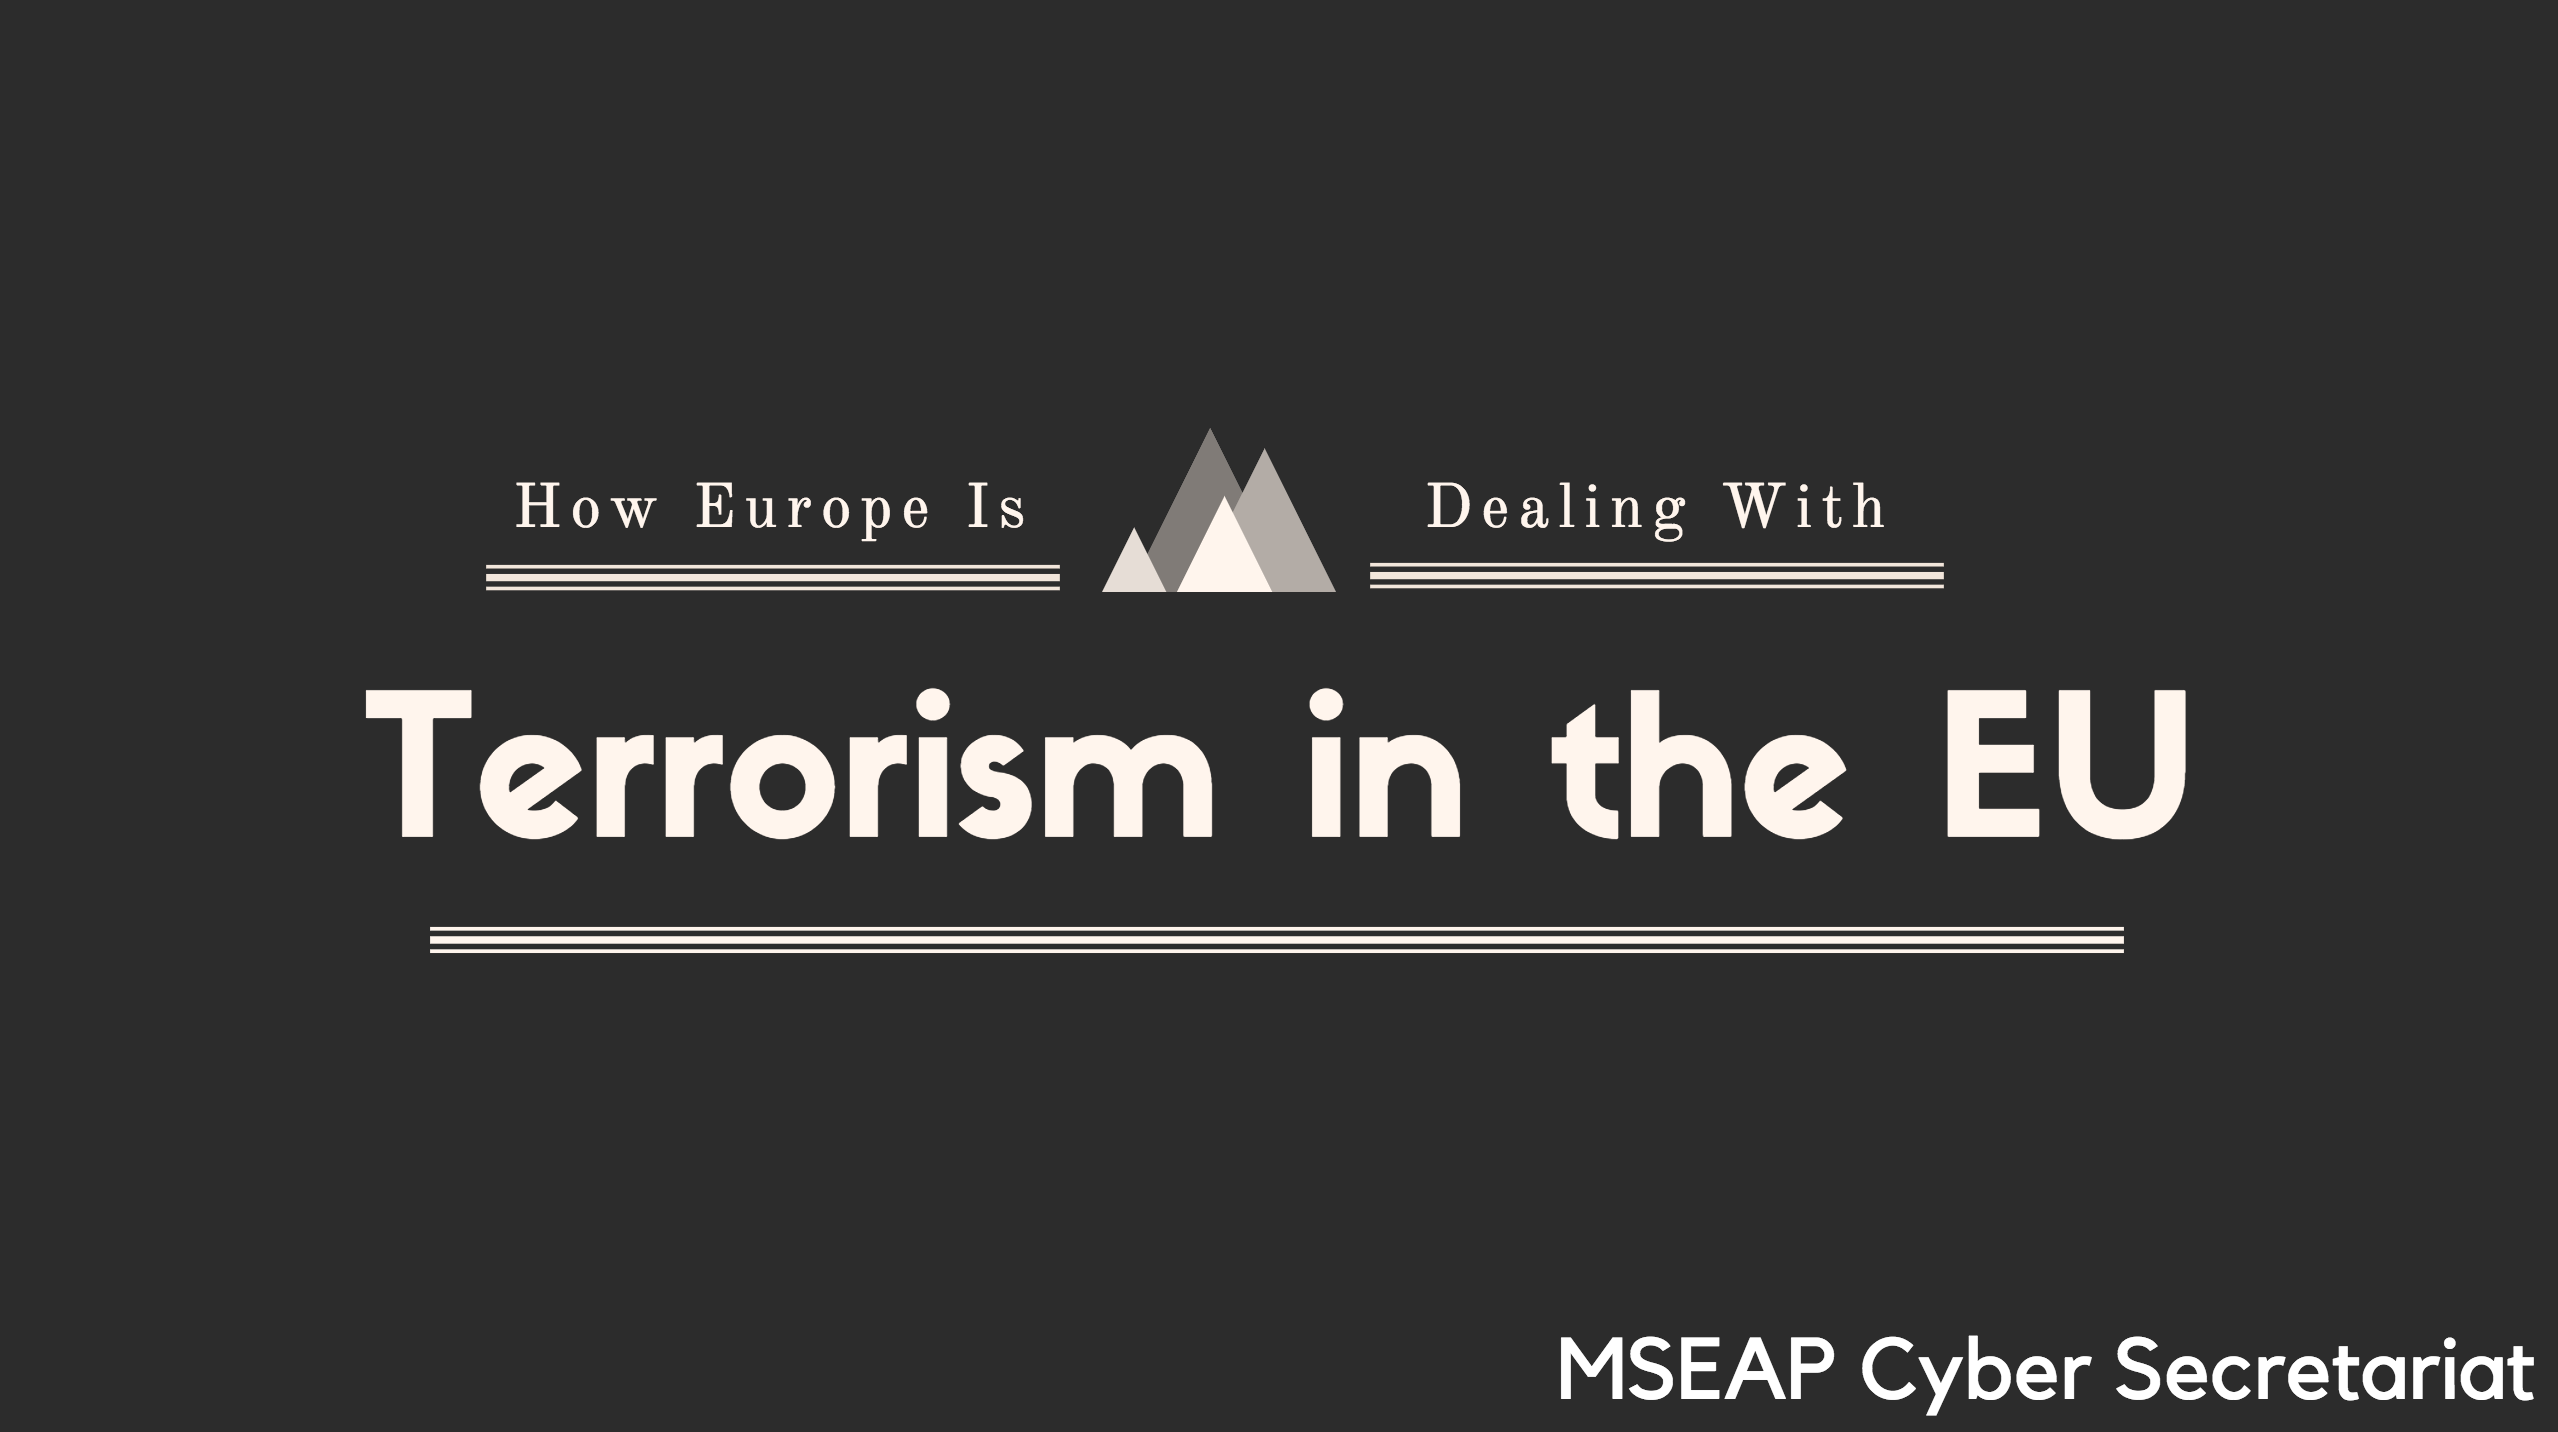 How Europe is dealing with terrorism in the EU